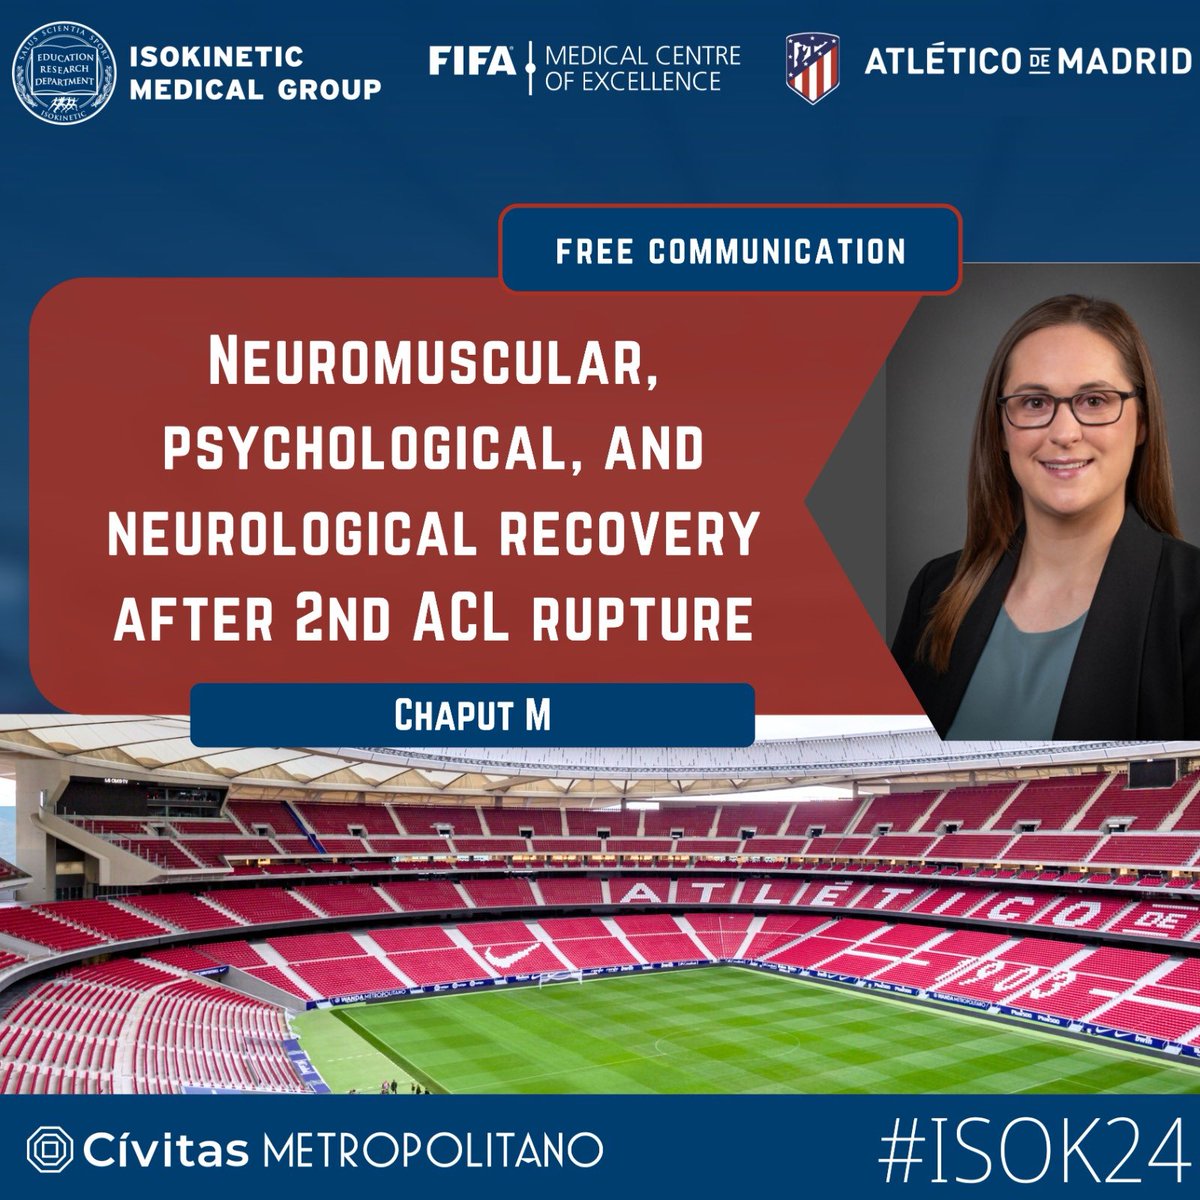 Looking forward to presenting a longitudinal case during the @footballmed conference in May! I also cannot wait to learn alongside the amazing faculty presenters!